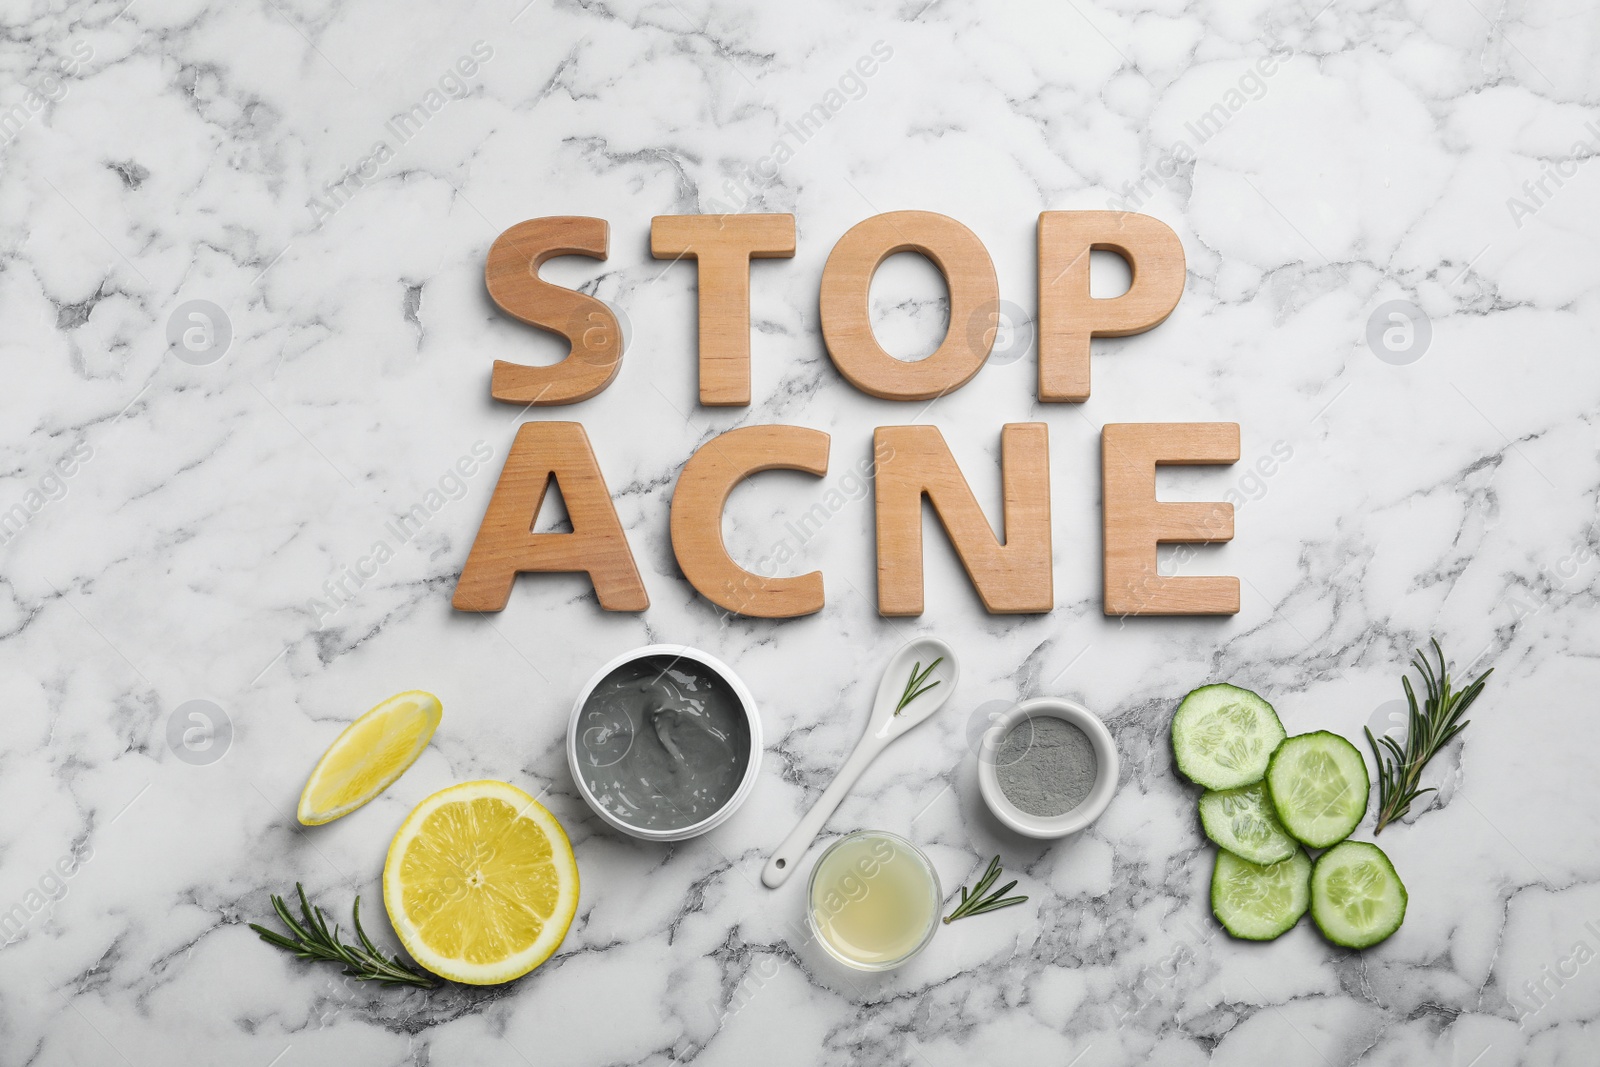 Photo of Phrase "Stop acne" and homemade effective problem skin remedies on light background, flat lay